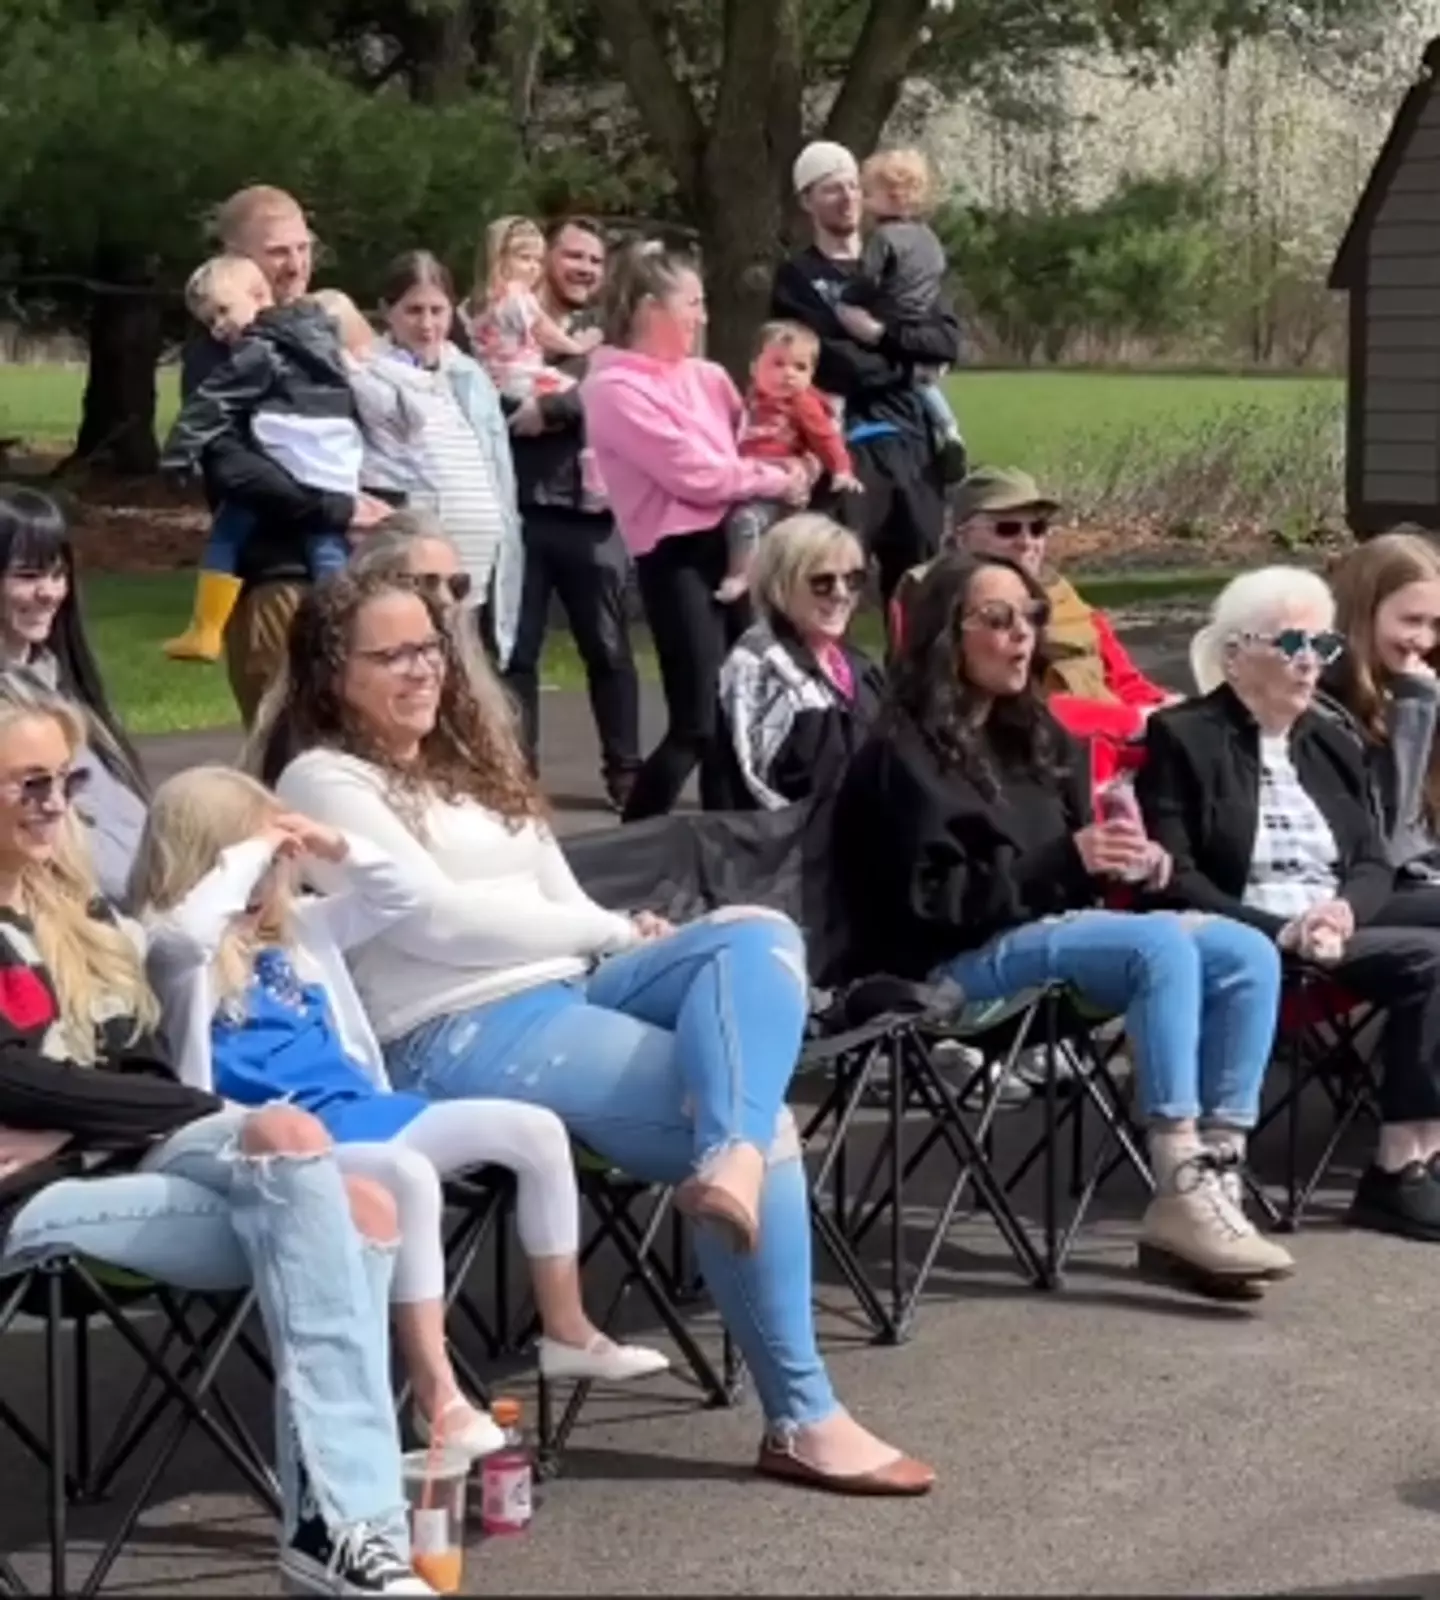 The family and friends of the parents-to-be spectating (TikTok/ @rosssmith)